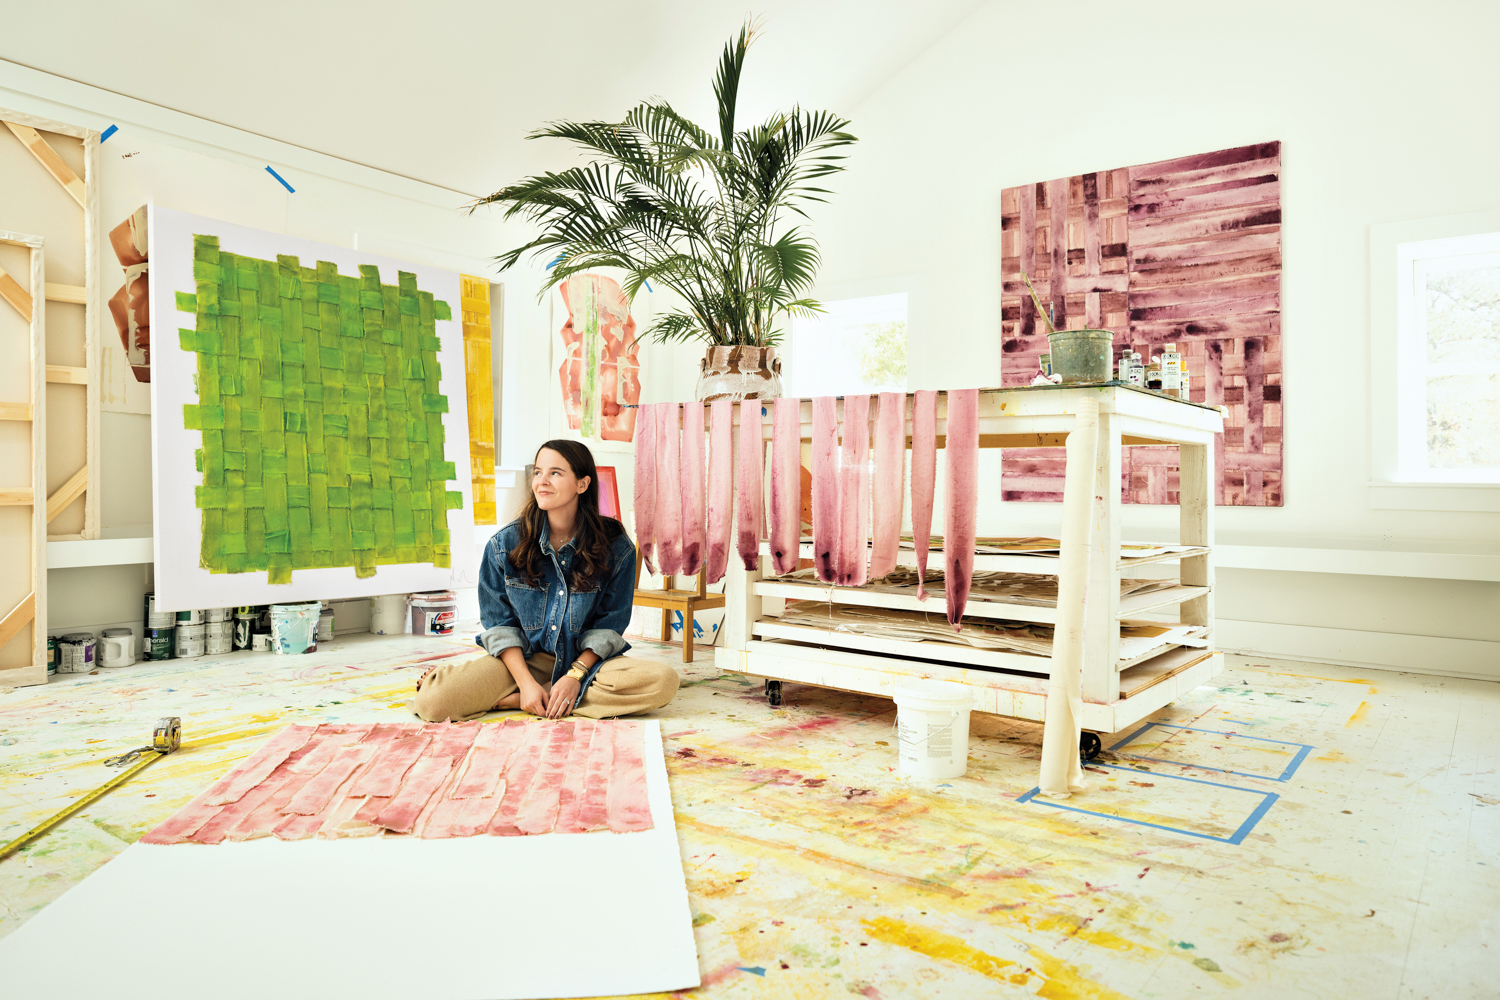 Sitting woman gently smiling within a white room surrounded by colorful artwork and a lush palm tree